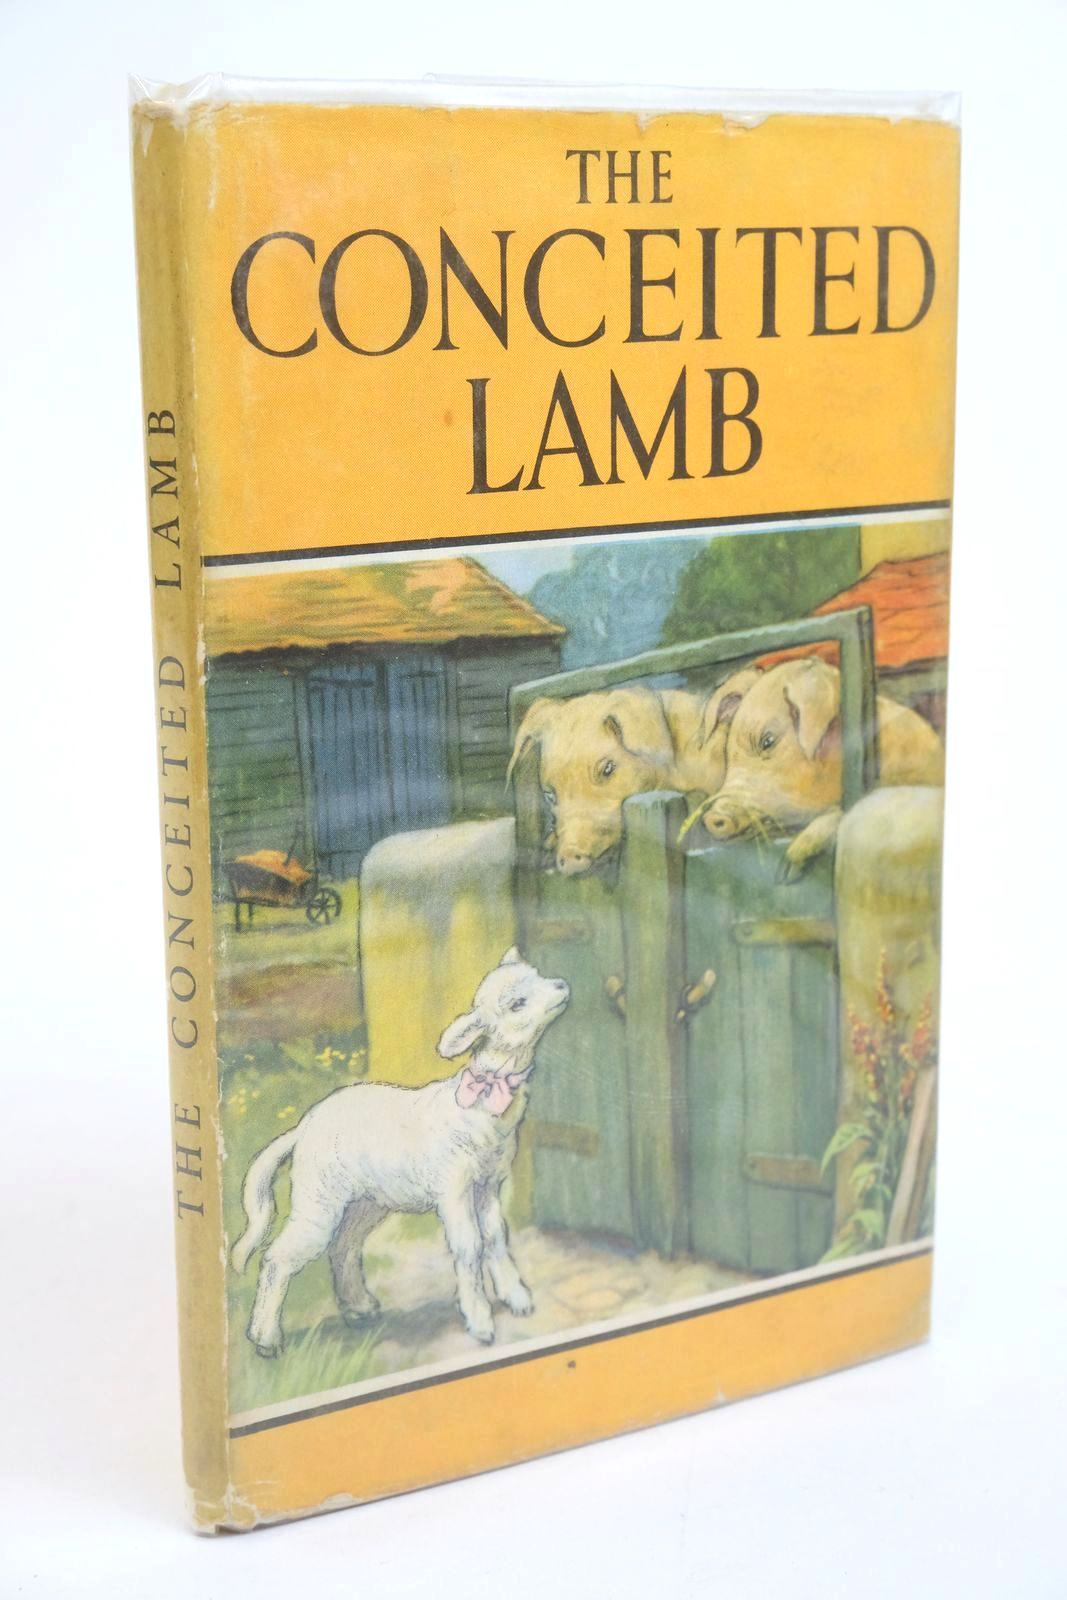 Photo of THE CONCEITED LAMB written by Barr, Noel illustrated by Hickling, P.B. published by Wills & Hepworth Ltd. (STOCK CODE: 1322392)  for sale by Stella & Rose's Books